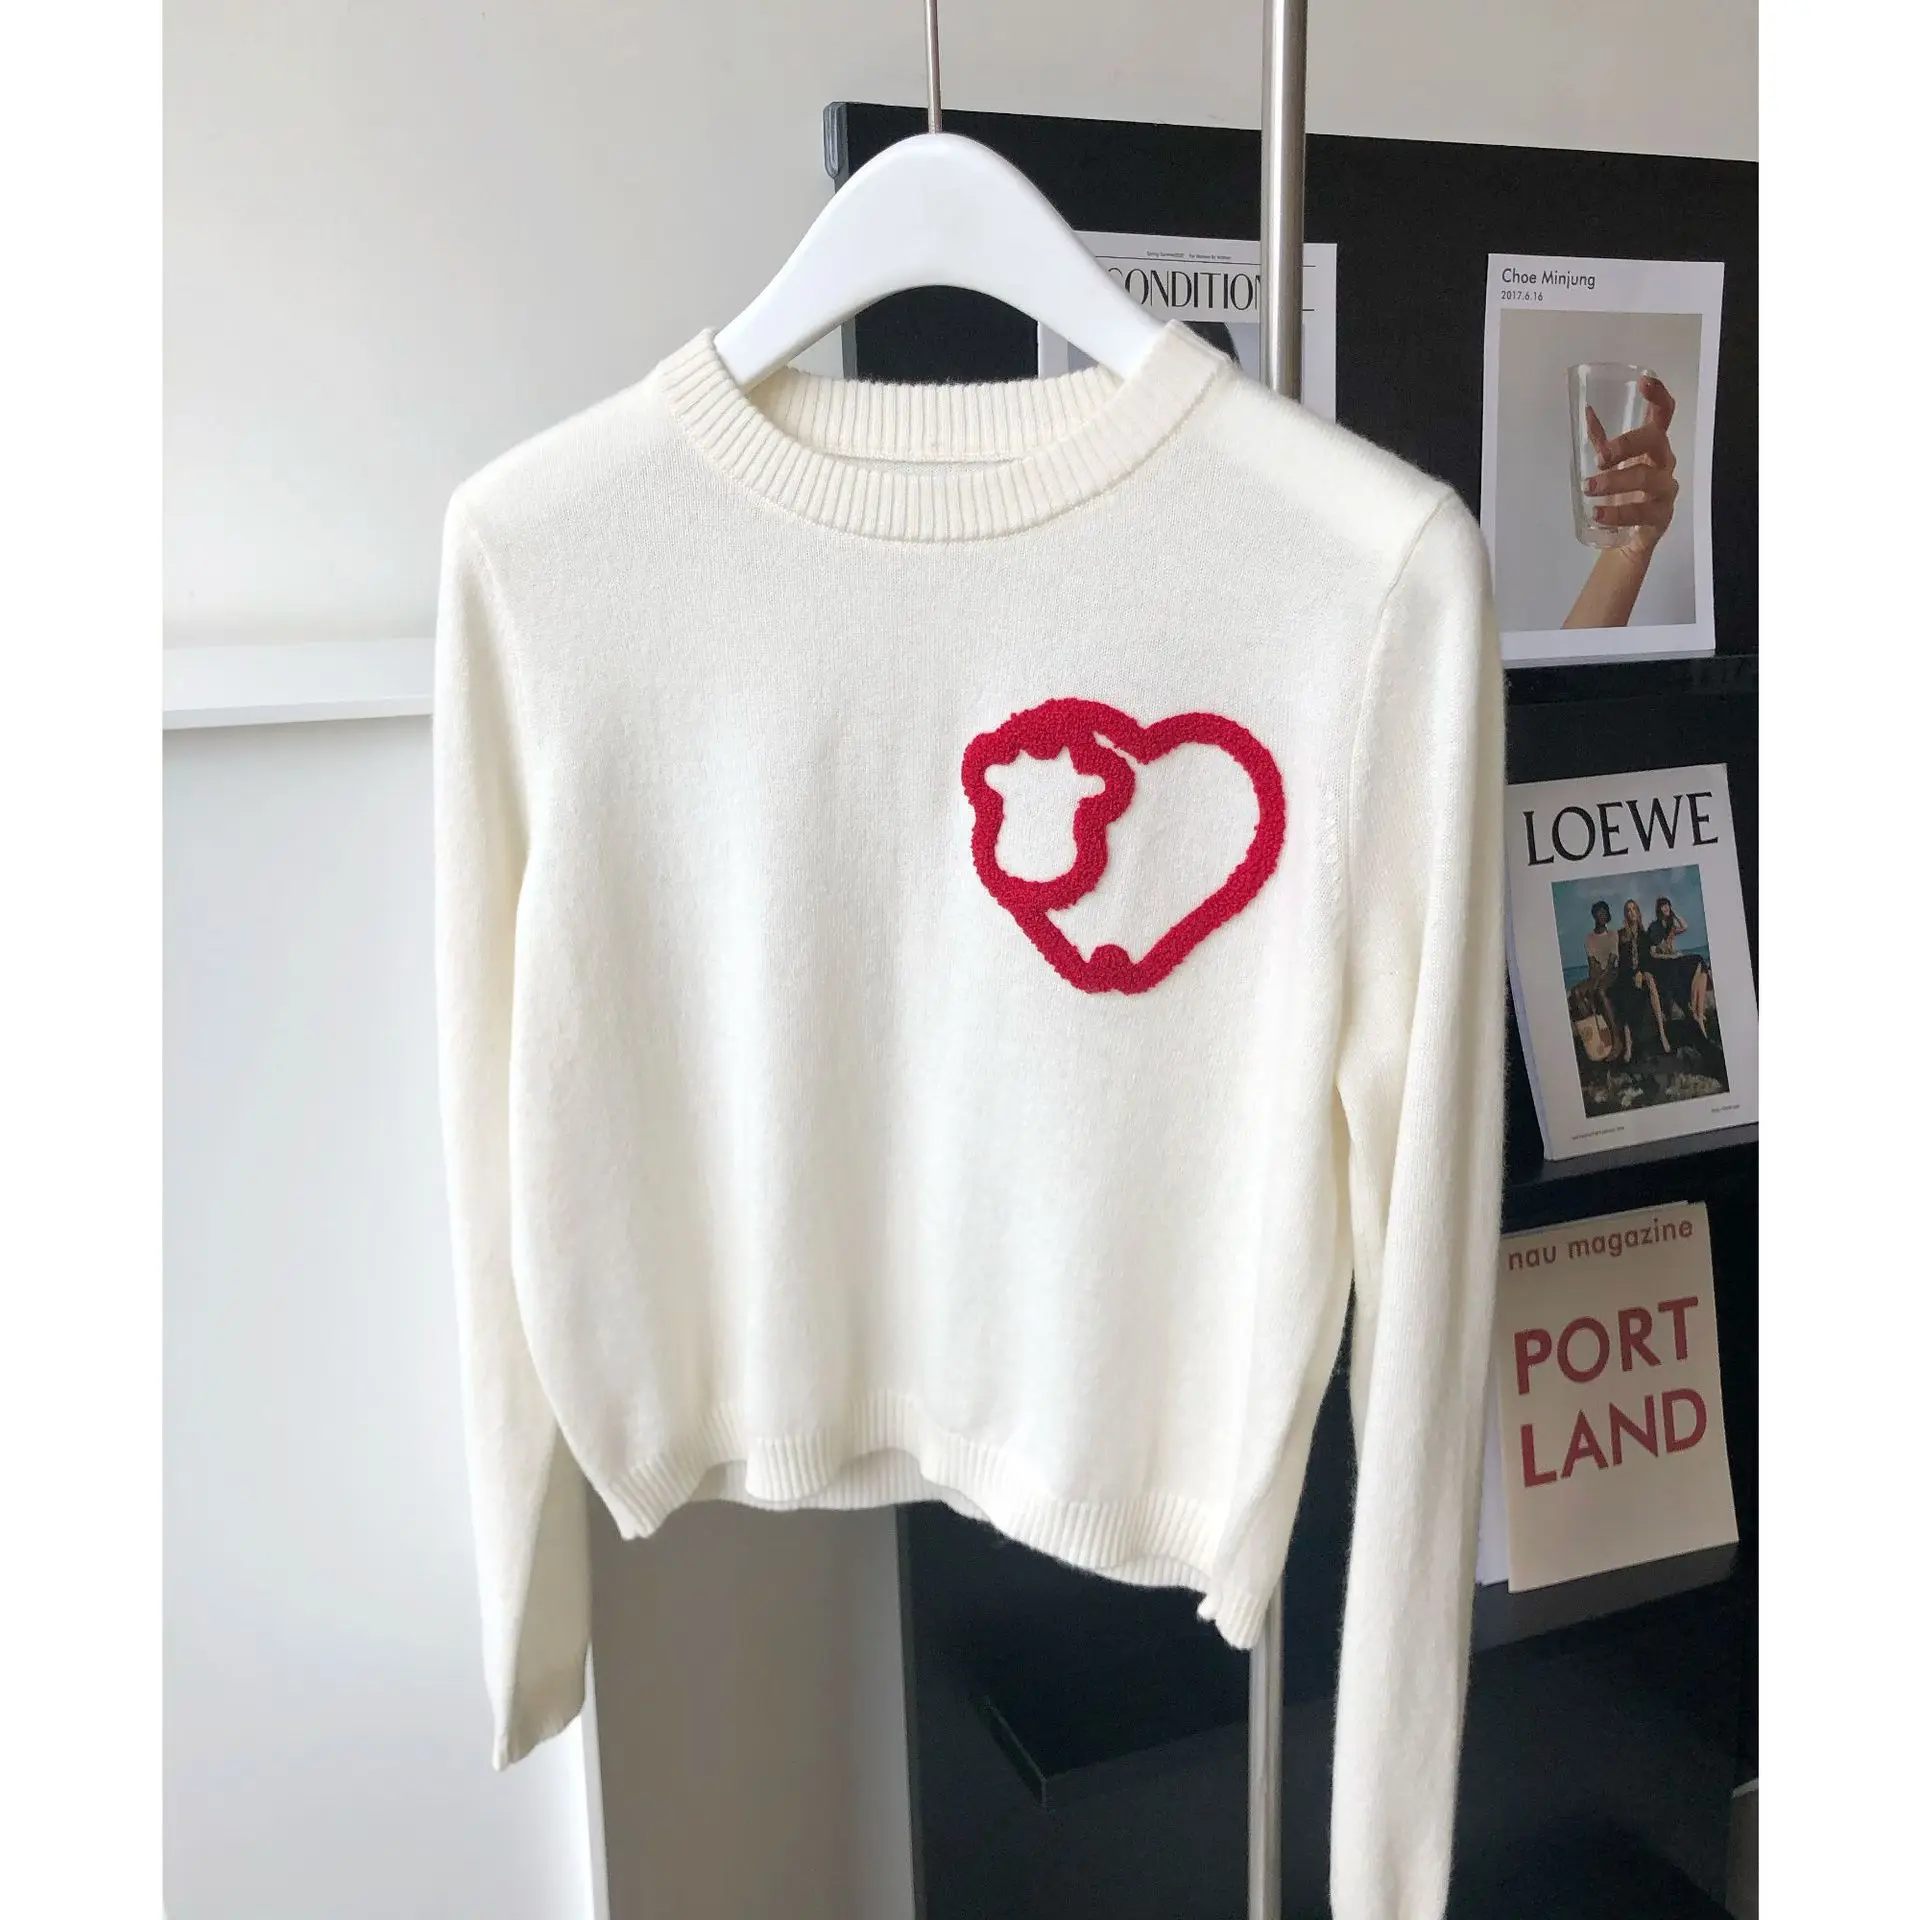 2021 Early Autumn Towel Embroidered Calf Knitted Long-sleeved T-shirt Pullover Loose Cute Sweater Top Women Women Sweater